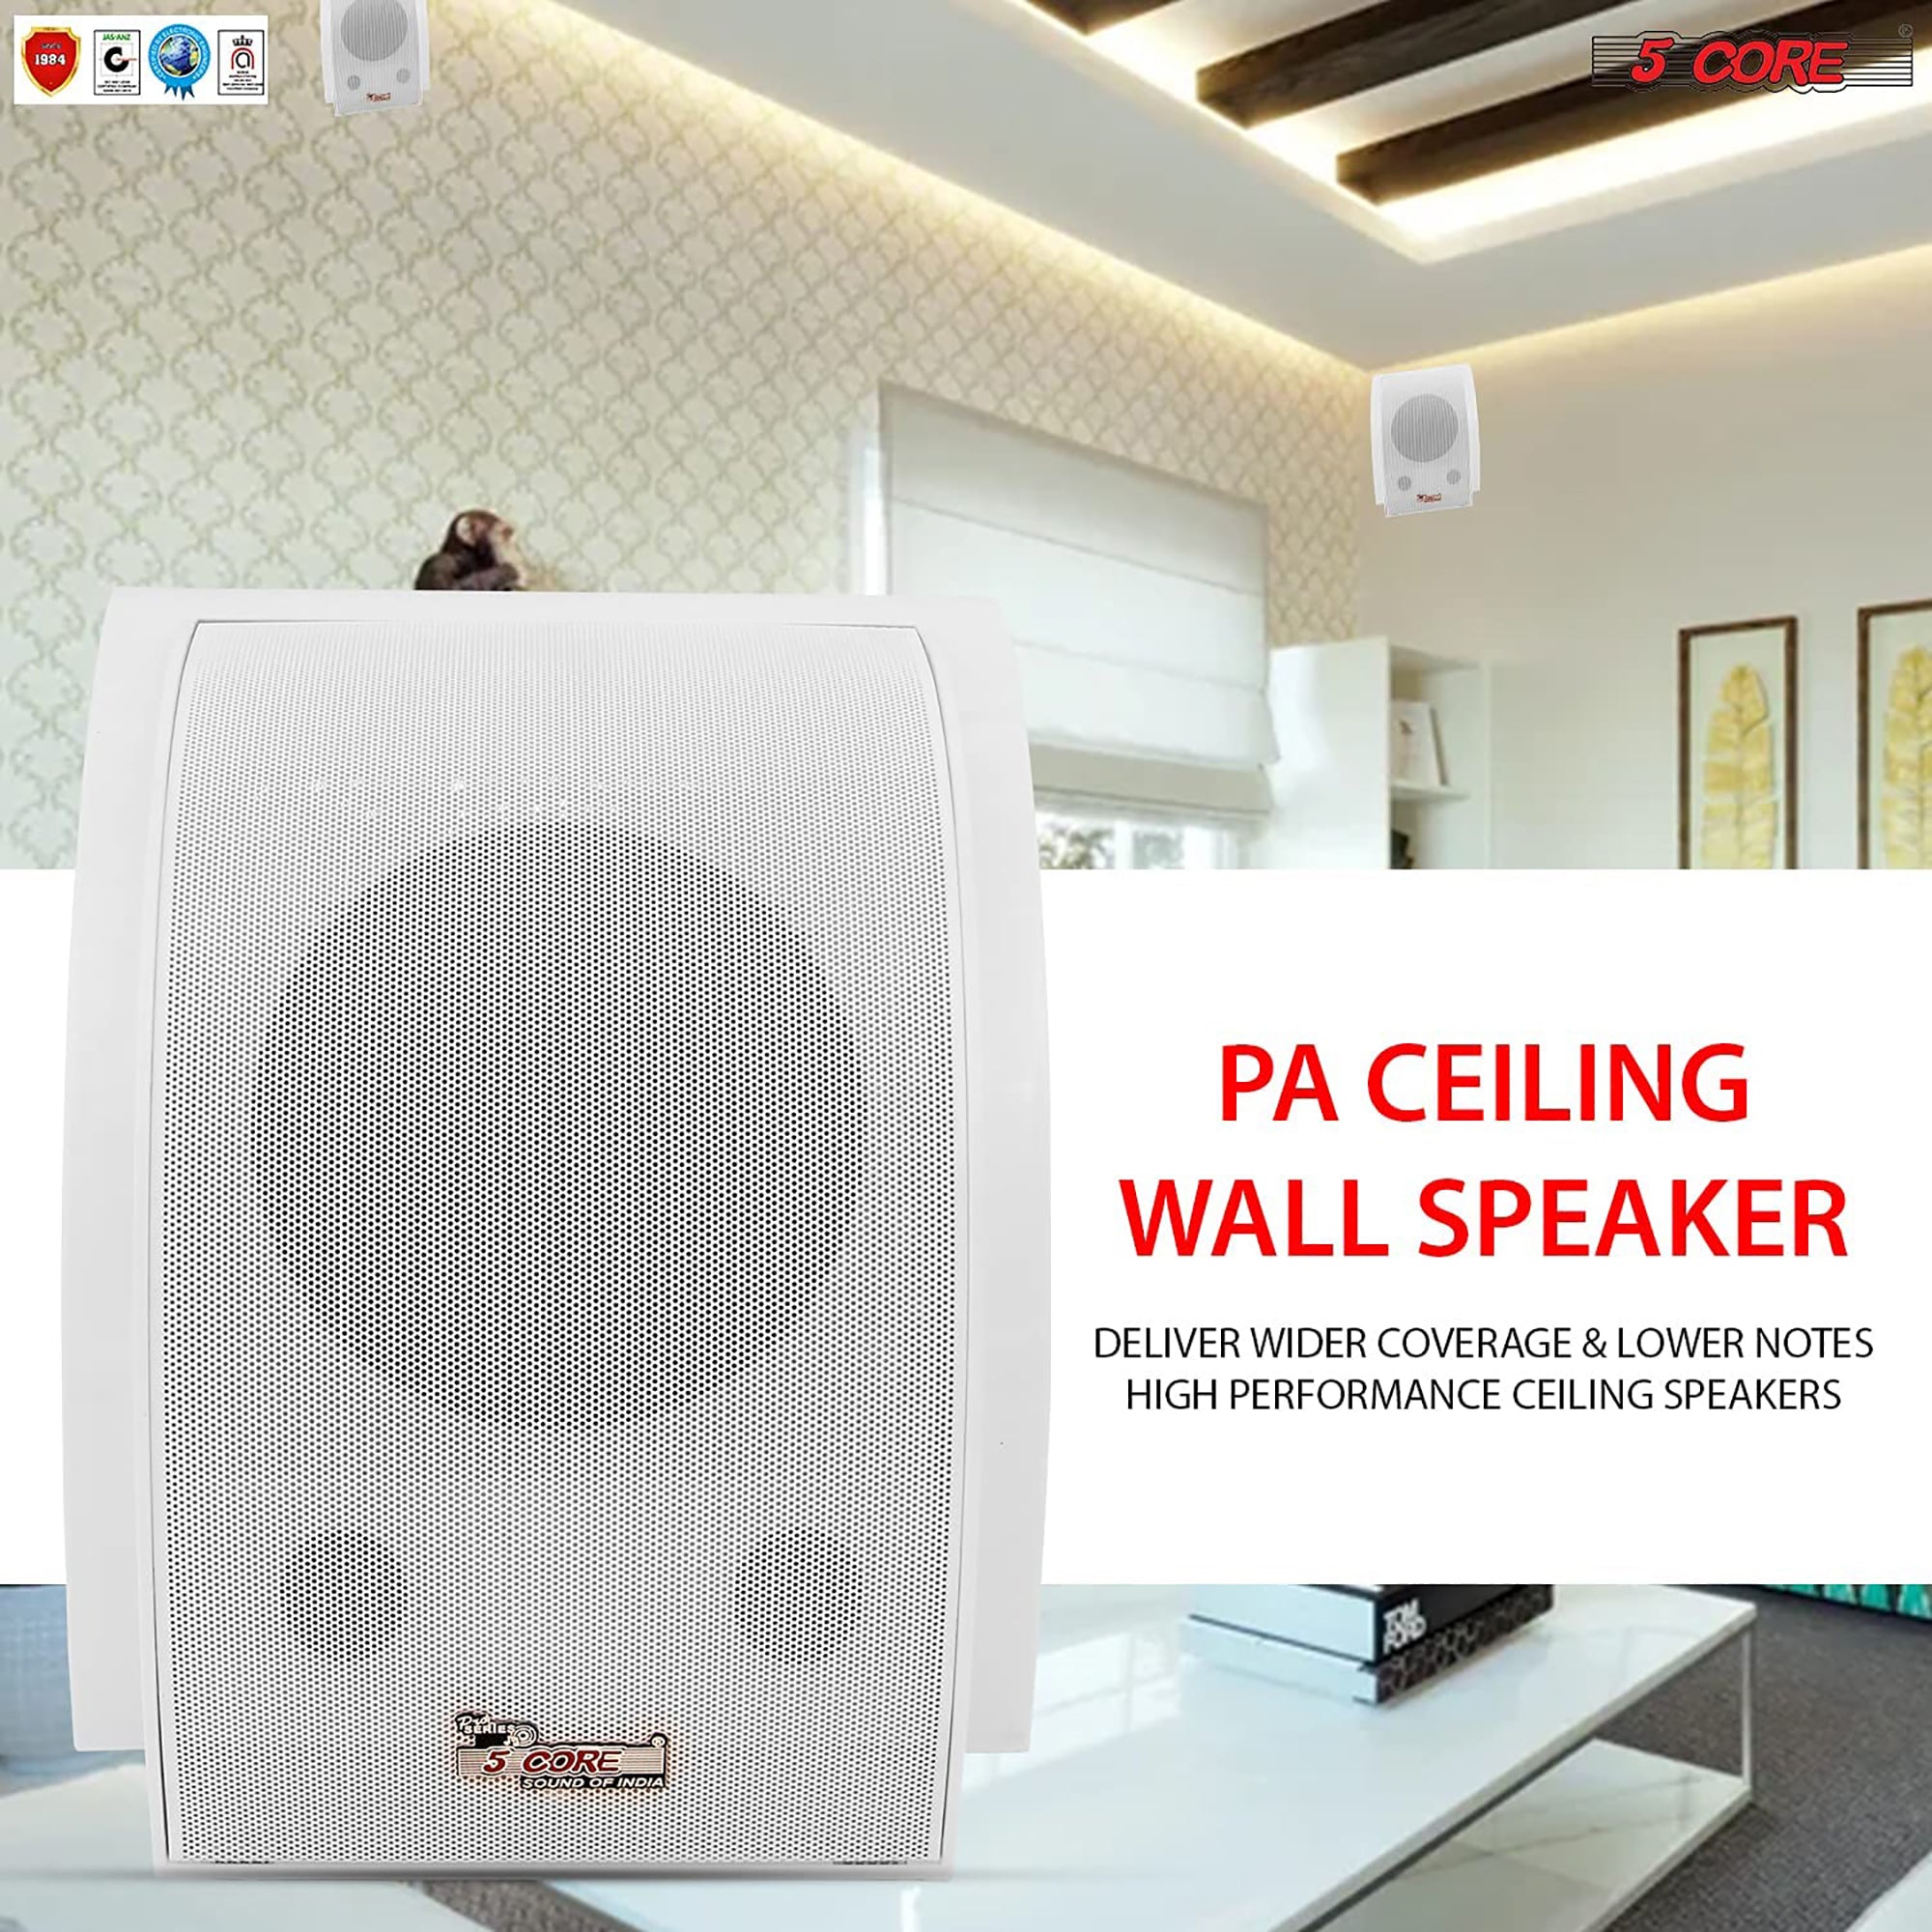 5 Core Wall Speaker 80W Max Power Indoor Outdoor Speakers White High Performance All Weather Wall Mount PA Speaker Wired Entertainment System for Patio Room Garage Restaurant Office - WS-11 5 2PCS